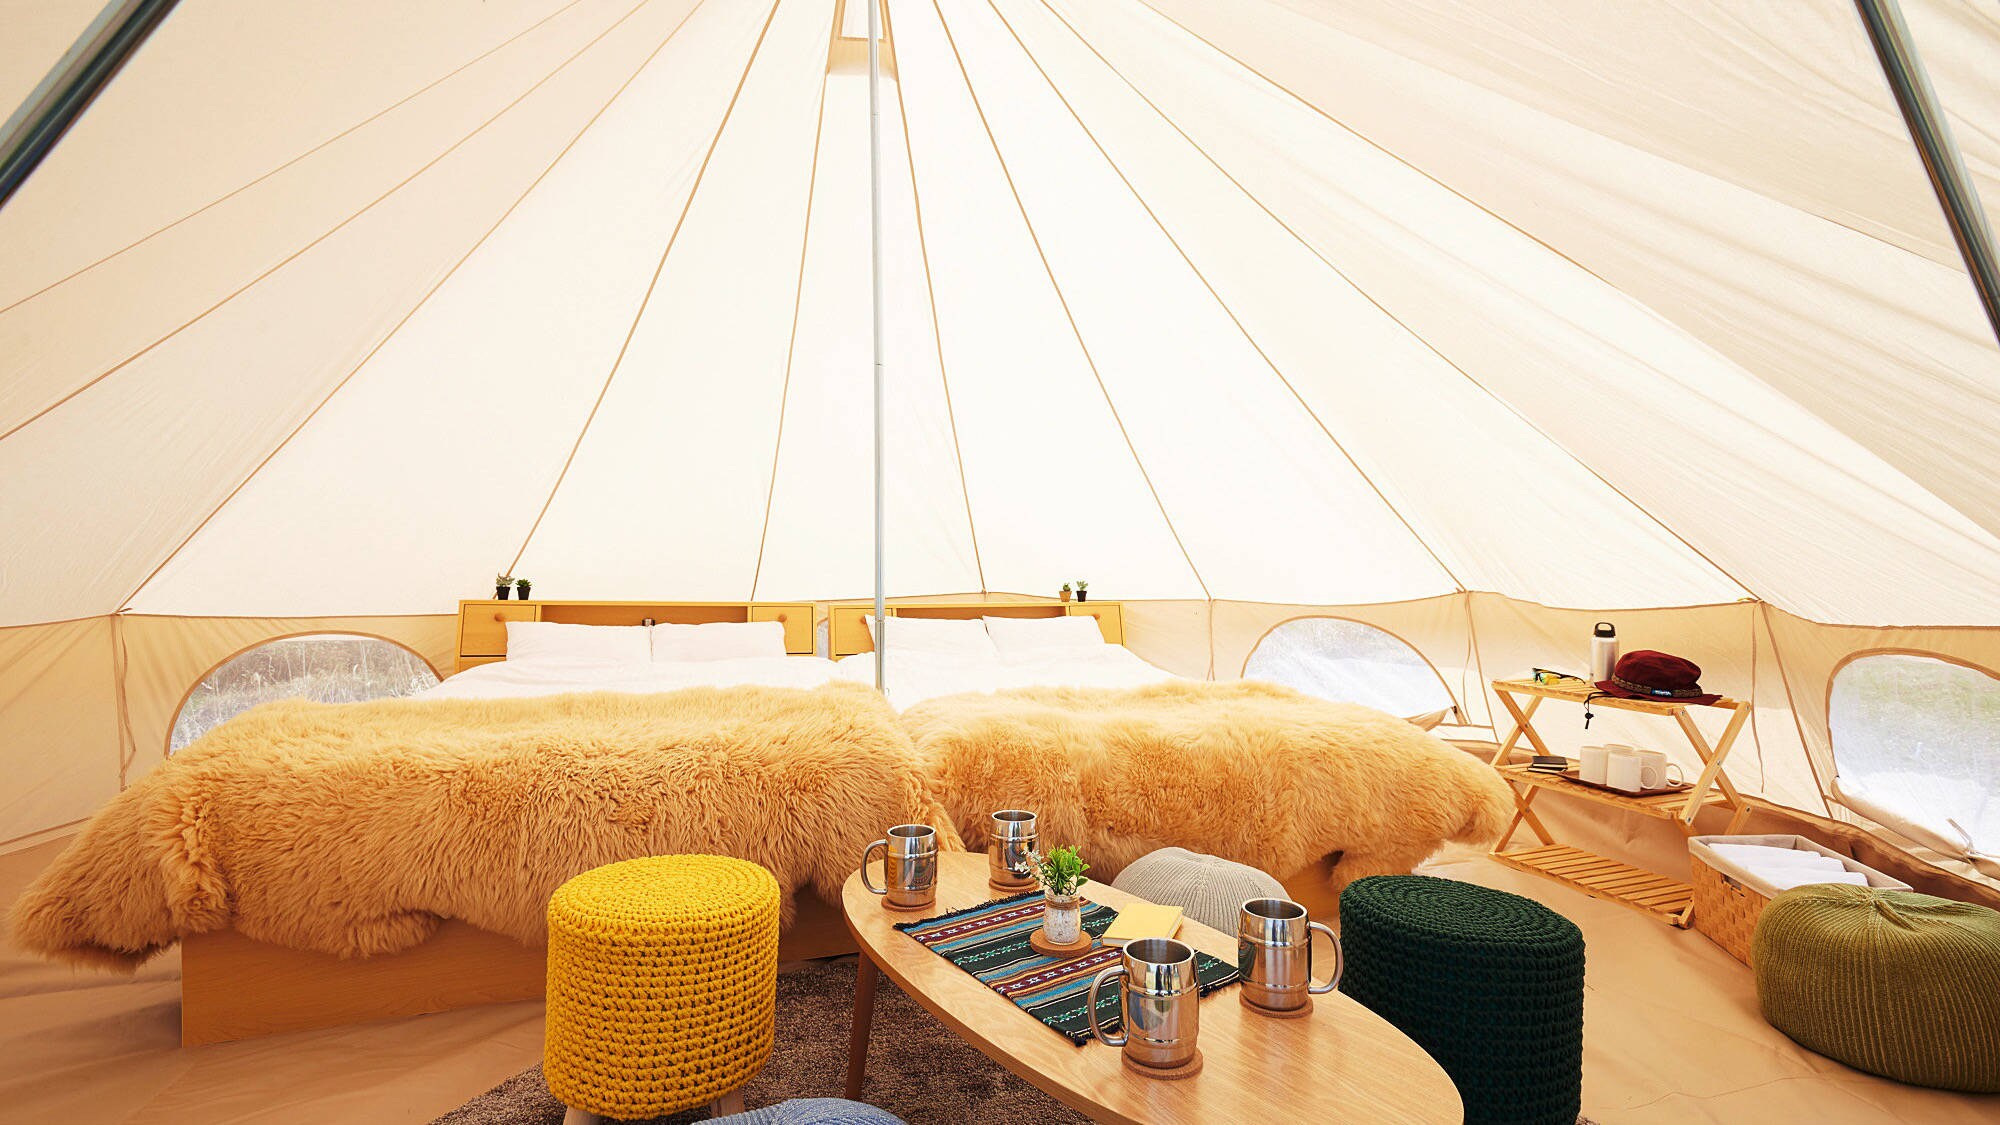 [Example of tent interior] Feel free to experience glamping in a tent unified in a natural and calm space